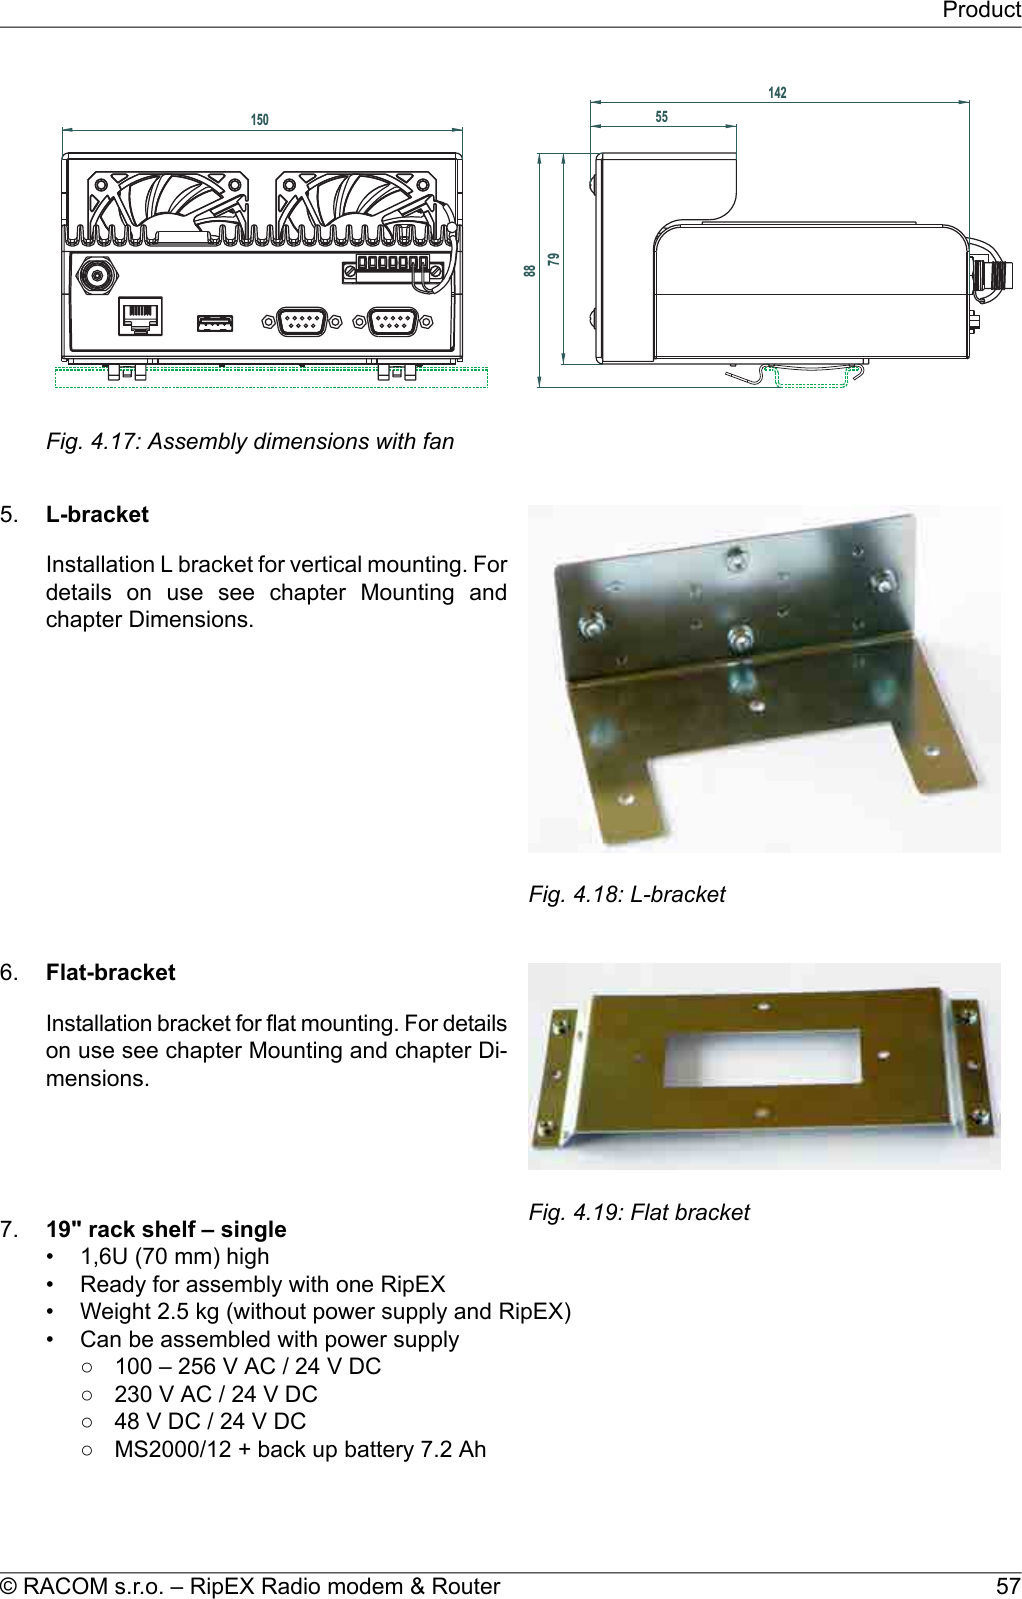 150881427955Fig. 4.17: Assembly dimensions with fan5.Fig. 4.18: L-bracketL-bracketInstallation L bracket for vertical mounting. Fordetails on use see chapter Mounting andchapter Dimensions.6.Fig. 4.19: Flat bracketFlat-bracketInstallation bracket for flat mounting. For detailson use see chapter Mounting and chapter Di-mensions.7. 19&quot; rack shelf – single• 1,6U (70 mm) high• Ready for assembly with one RipEX• Weight 2.5 kg (without power supply and RipEX)• Can be assembled with power supply○ 100 – 256 V AC / 24 V DC○ 230 V AC / 24 V DC○ 48 V DC / 24 V DC○ MS2000/12 + back up battery 7.2 Ah57© RACOM s.r.o. – RipEX Radio modem &amp; RouterProduct